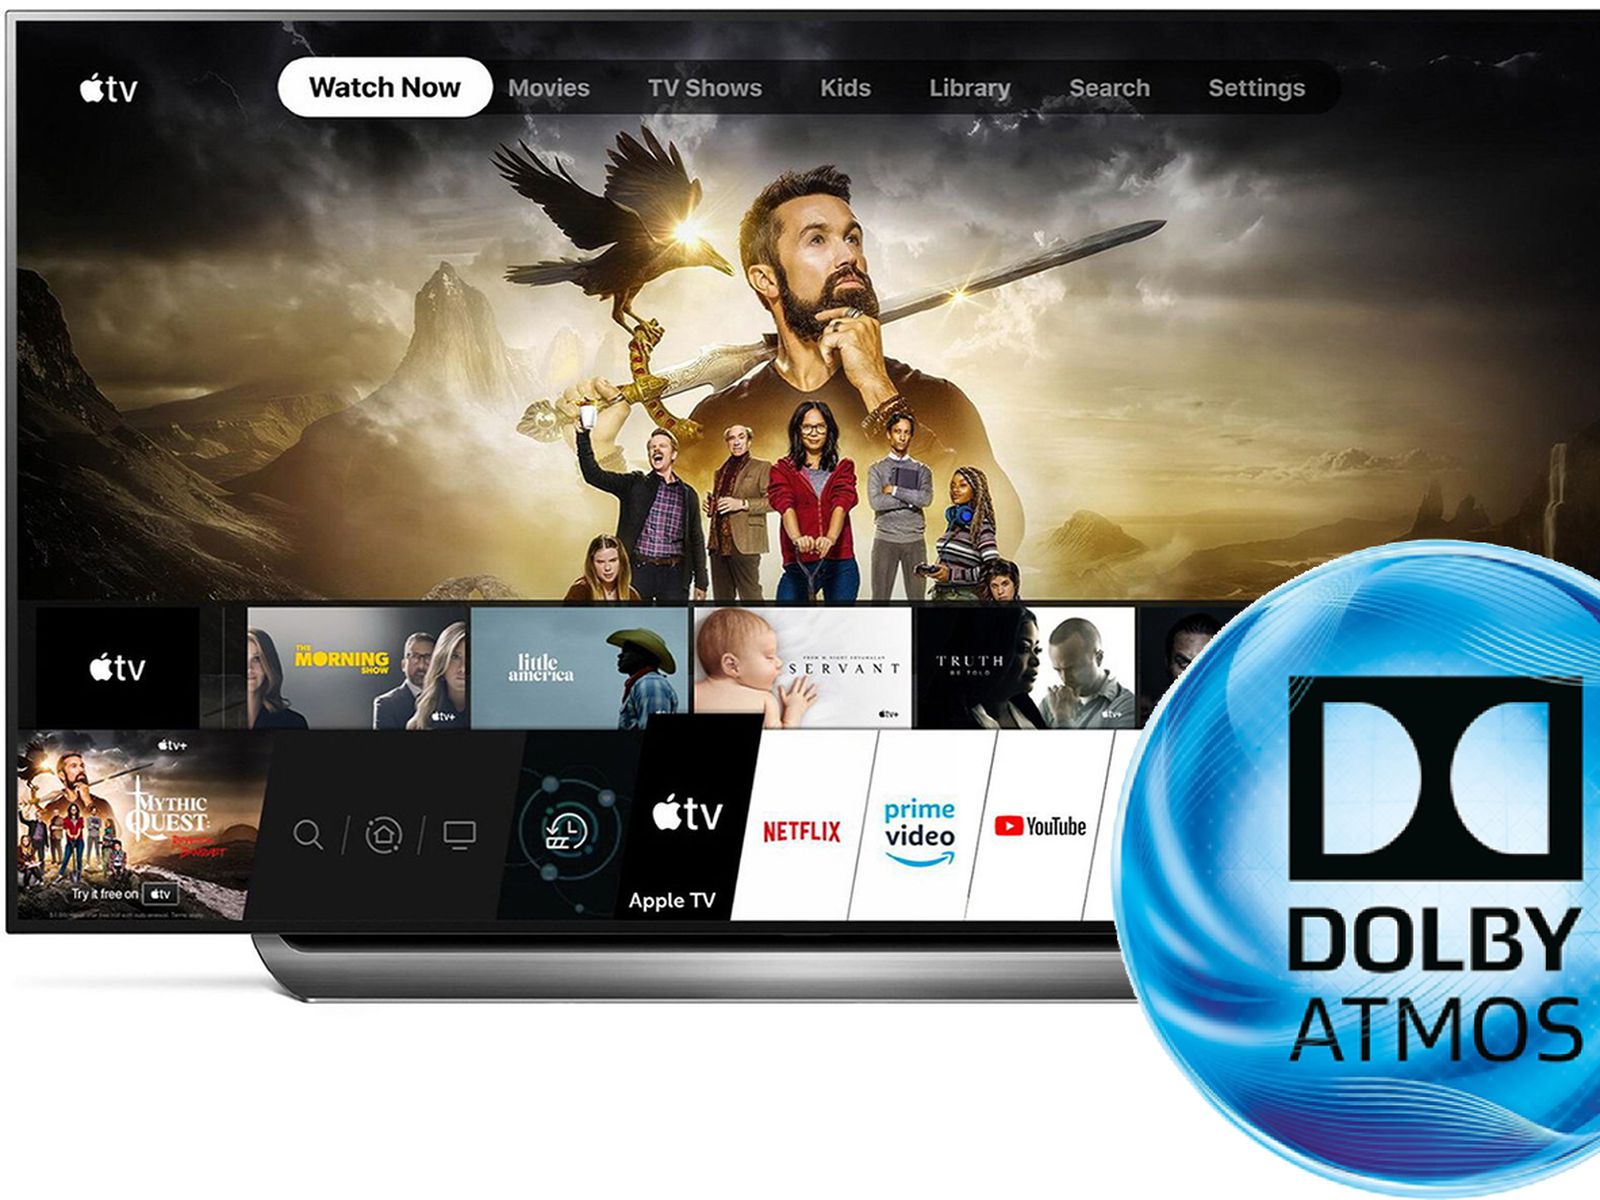 Apple TV App Select LG TVs Support Atmos Sound 'Later This Year' - MacRumors